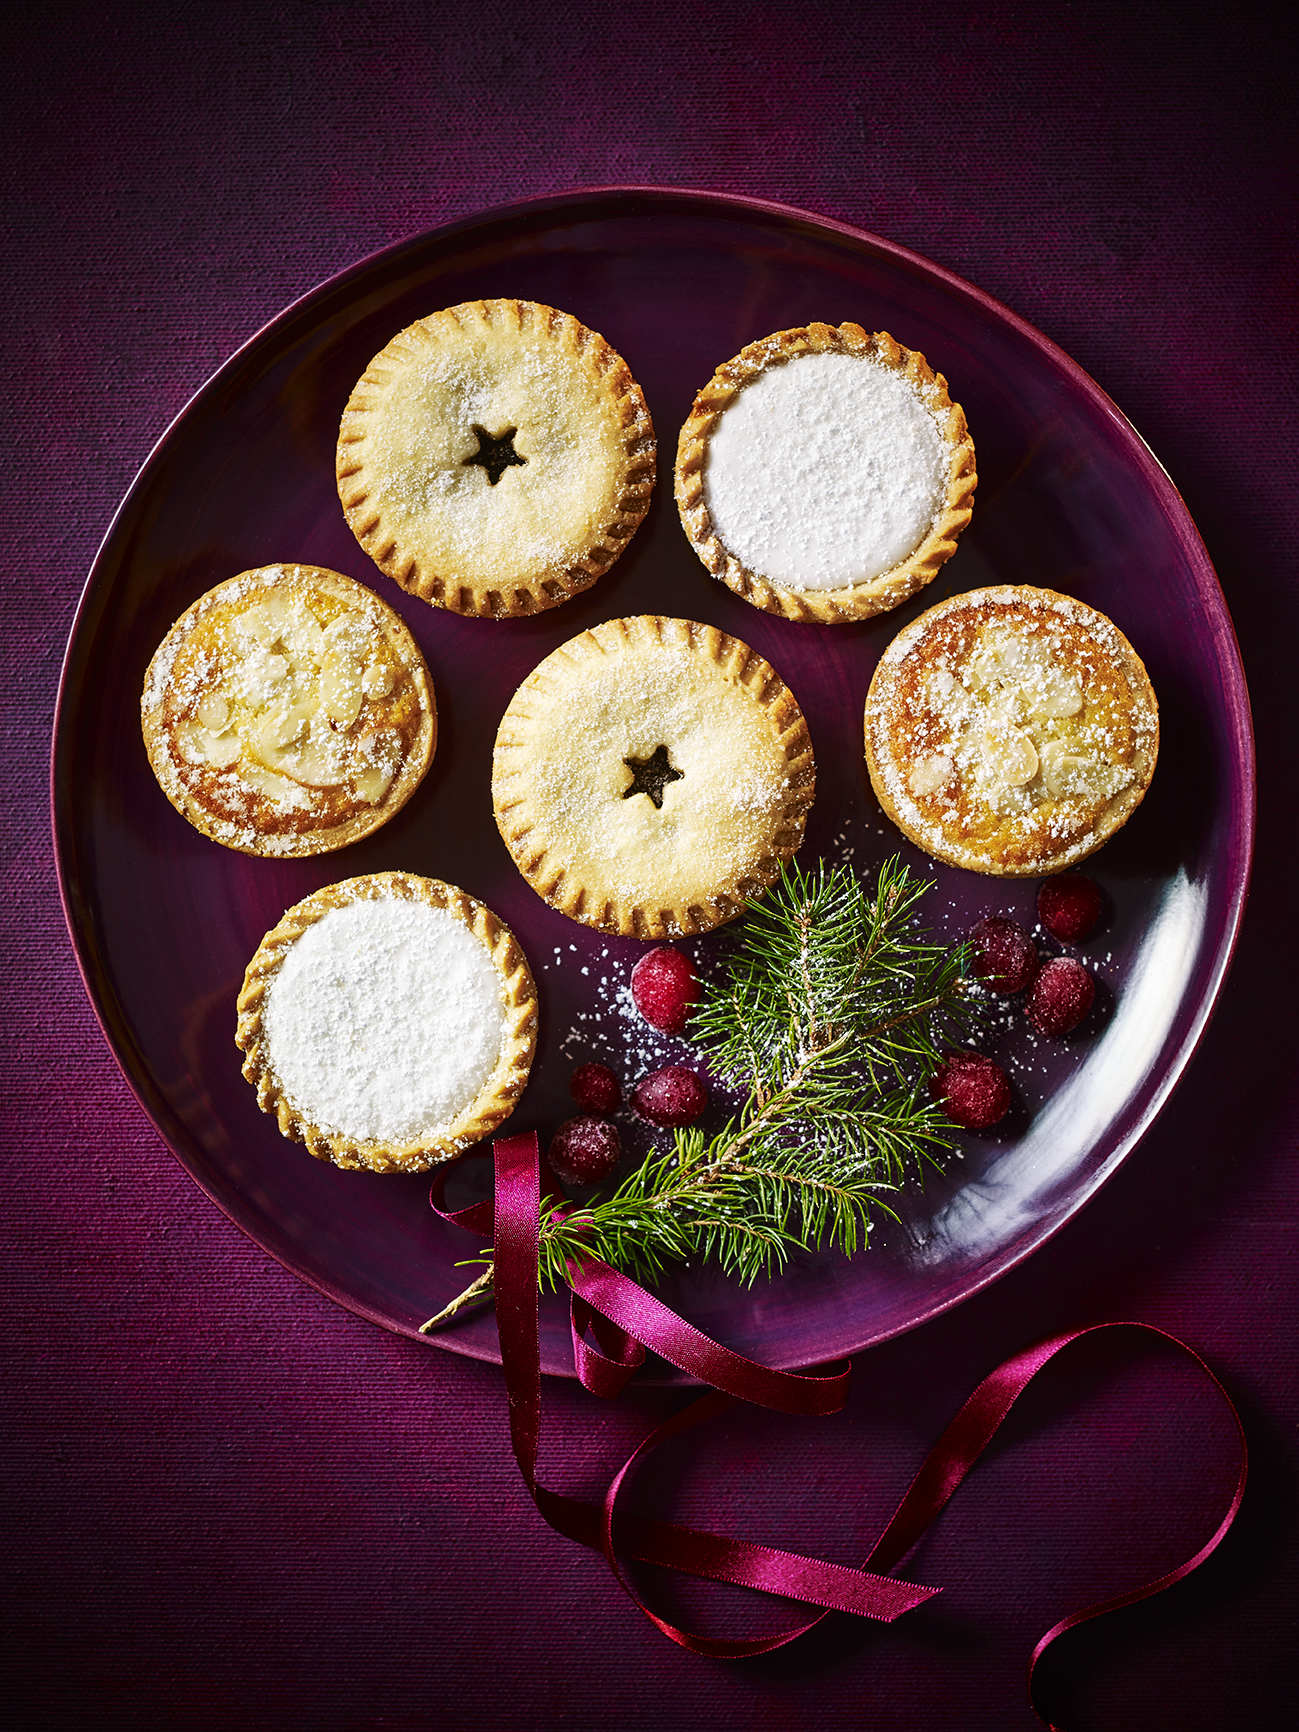 A selection of gourmet Christmas treats from Marks and Spencer